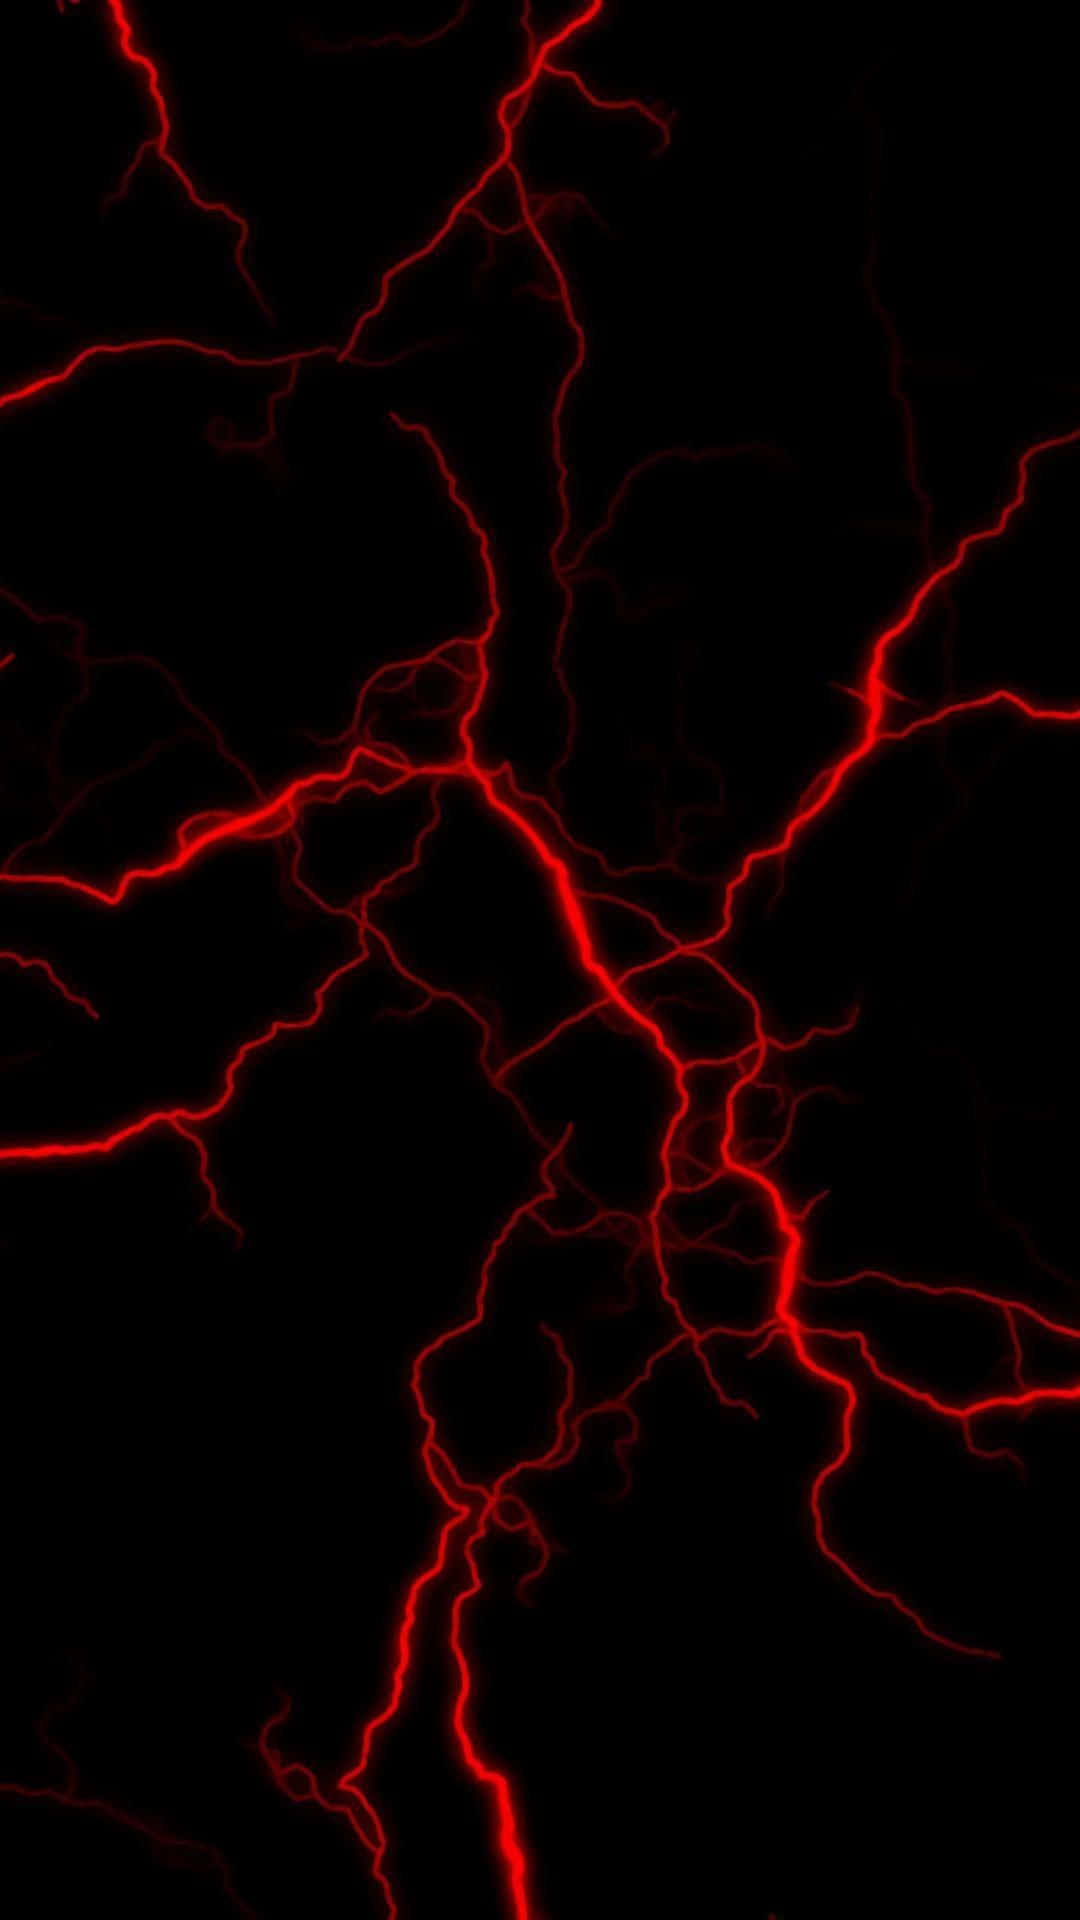 Get a charge out of life with the Lightning Bolt Iphone Wallpaper